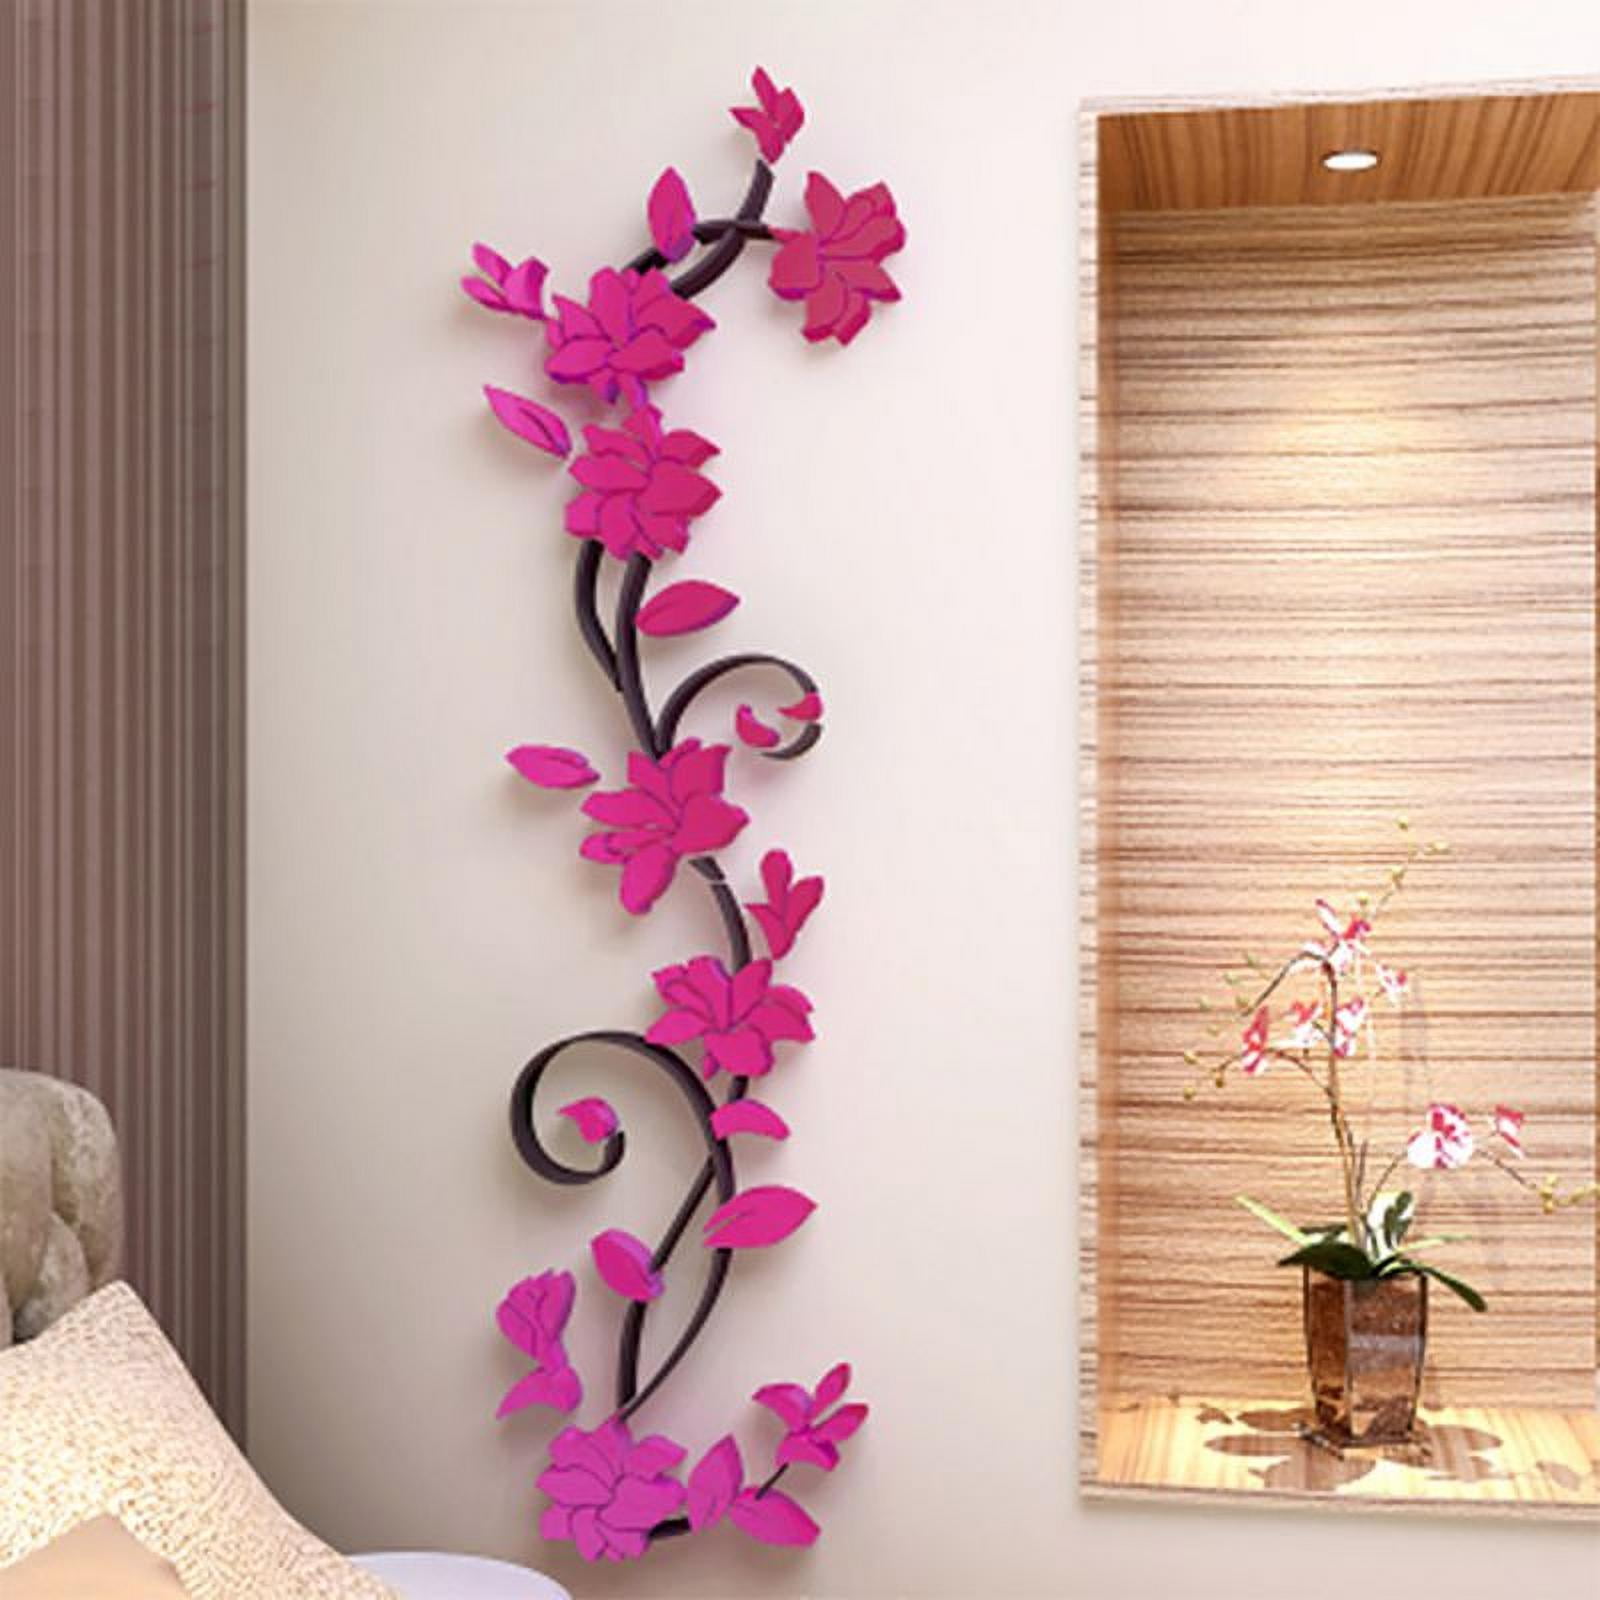 Removable Family Vinyl Quote DIY Flower Wall Sticker Decal Mural Home Decor LOT 